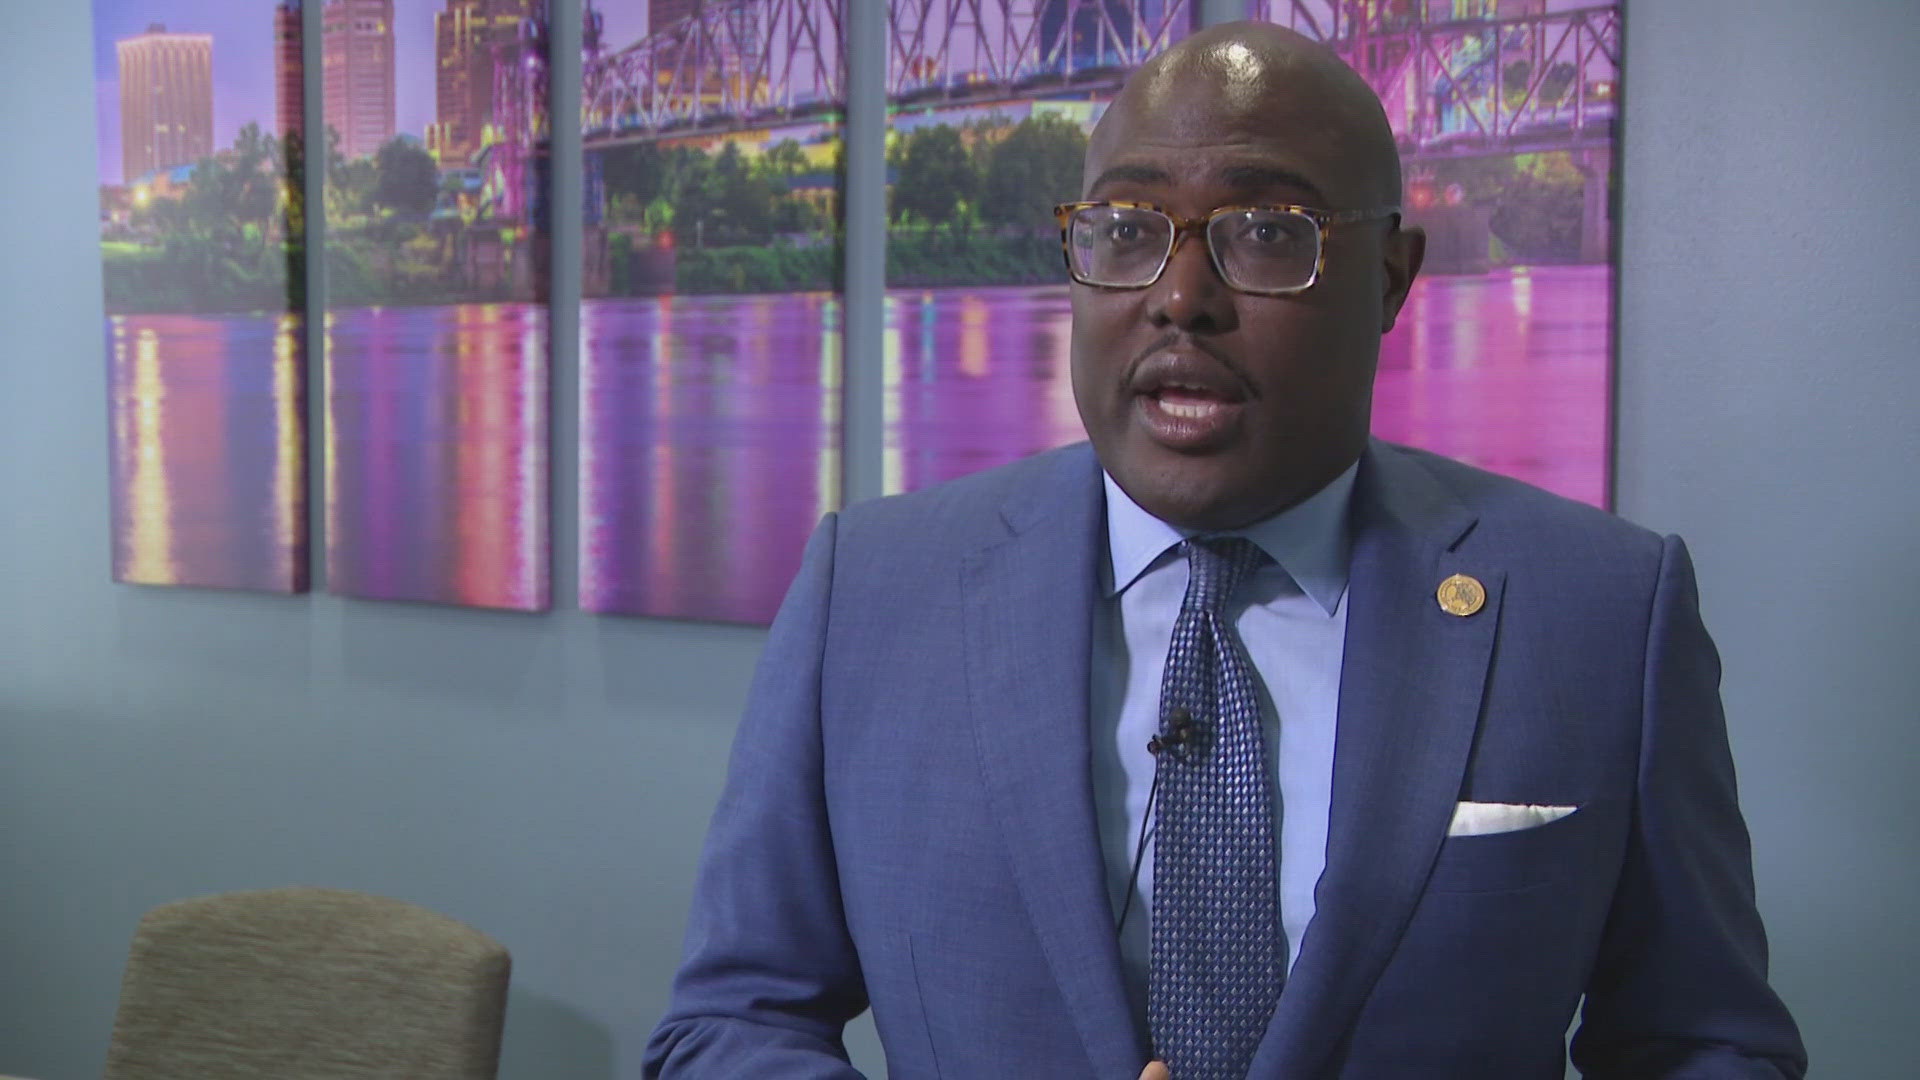 Little Rock residents will be the ones to decide if they want this 1% sales tax increase. Here's why Mayor Frank Scott is pushing for the change.